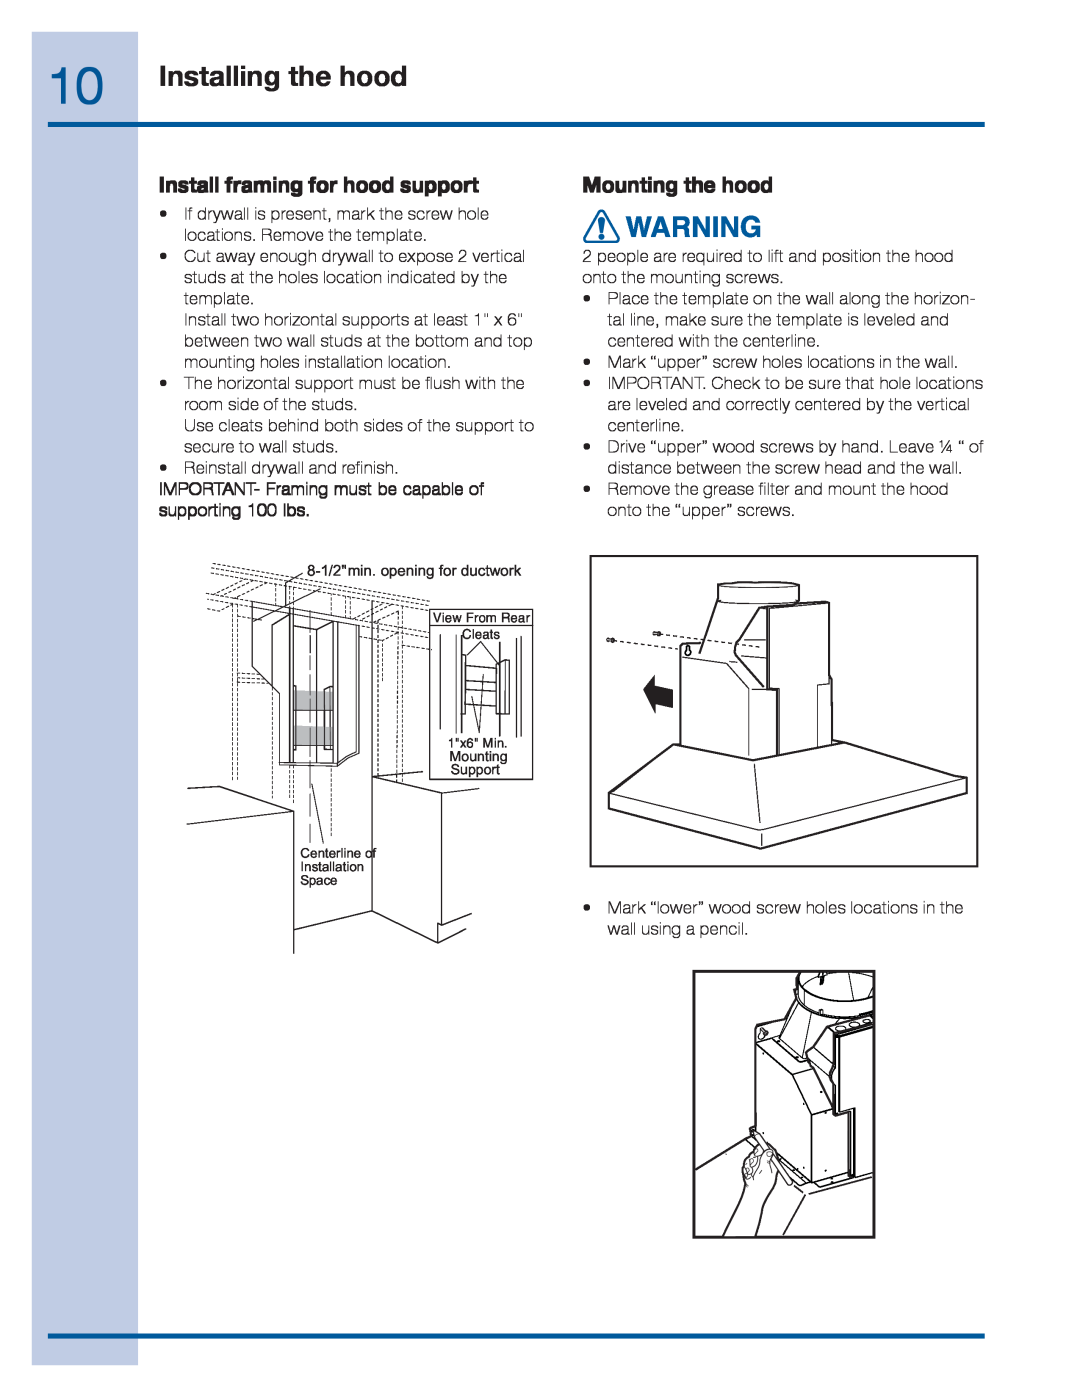 Frigidaire RH30WC55GS, RH36WC55GS, EI30WC55GS manual Install framing for hood support, Mounting the hood, Installing the hood 